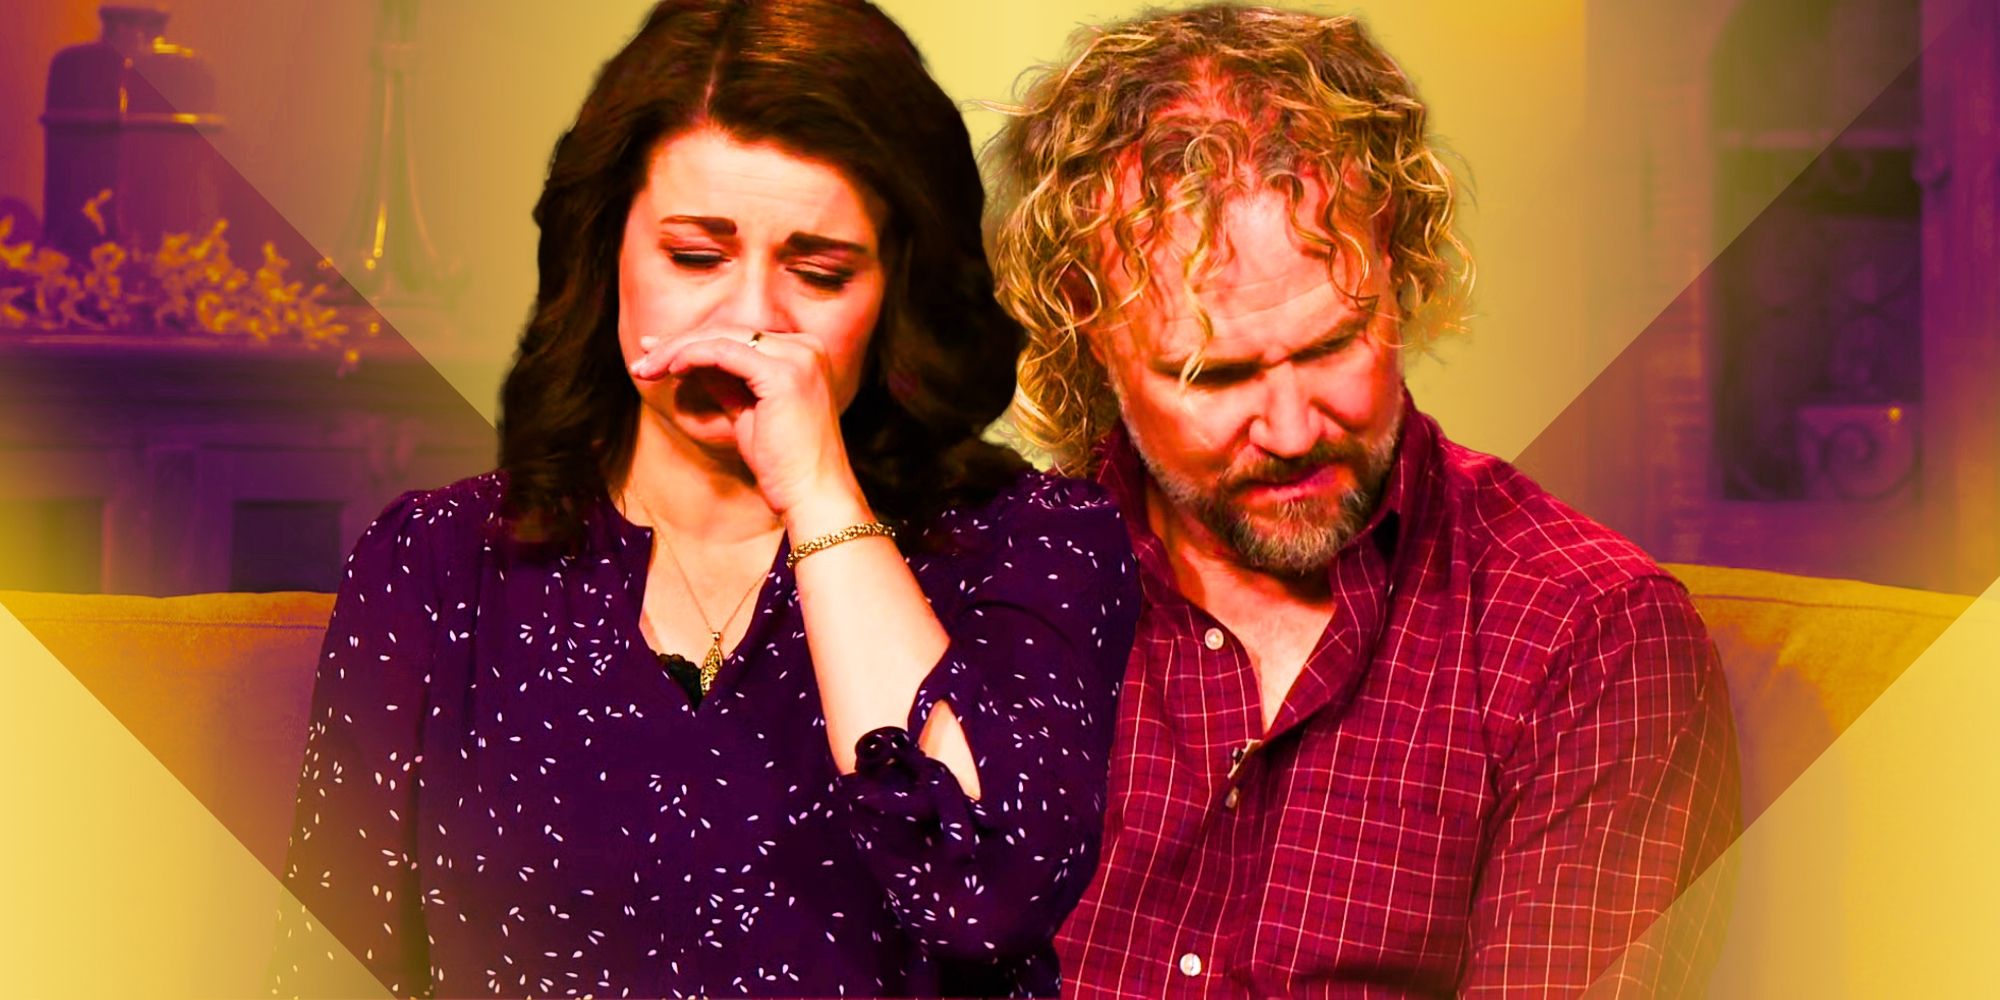  Sister Wives Robyn & Kody crying and sad yellow filtered background